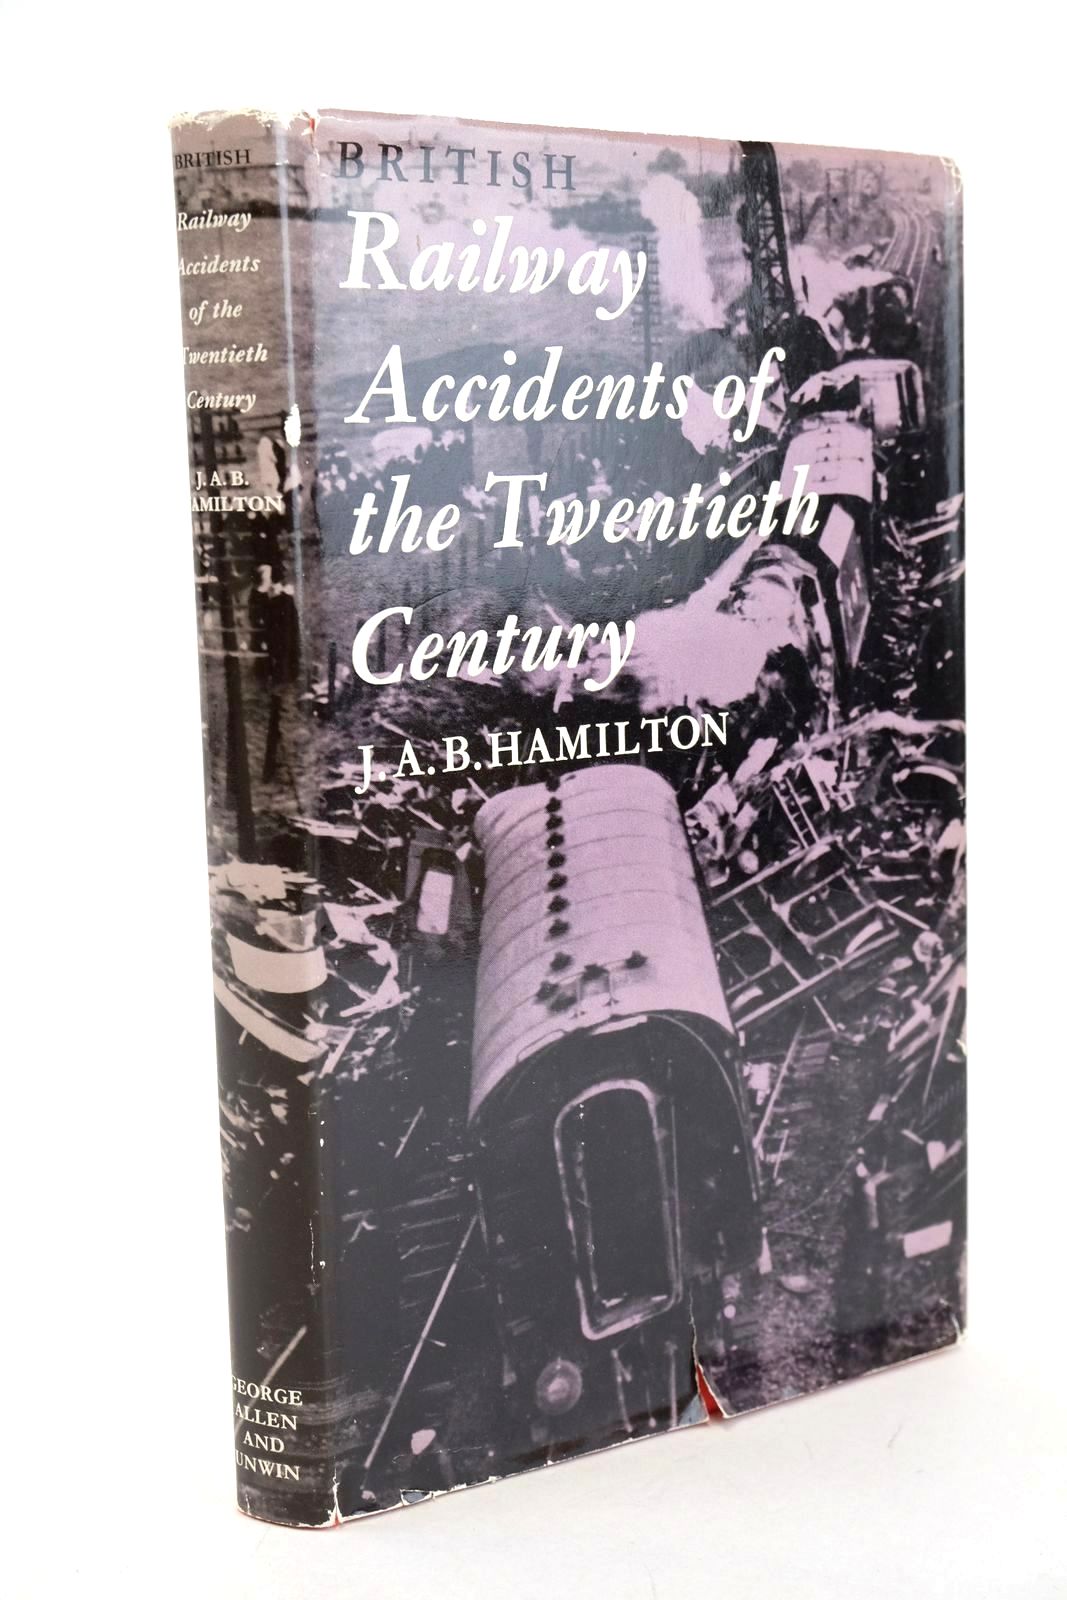 Photo of BRITISH RAILWAY ACCIDENTS OF THE TWENTIETH CENTURY written by Hamilton, J.A.B. published by George Allen &amp; Unwin Ltd. (STOCK CODE: 1327061)  for sale by Stella & Rose's Books